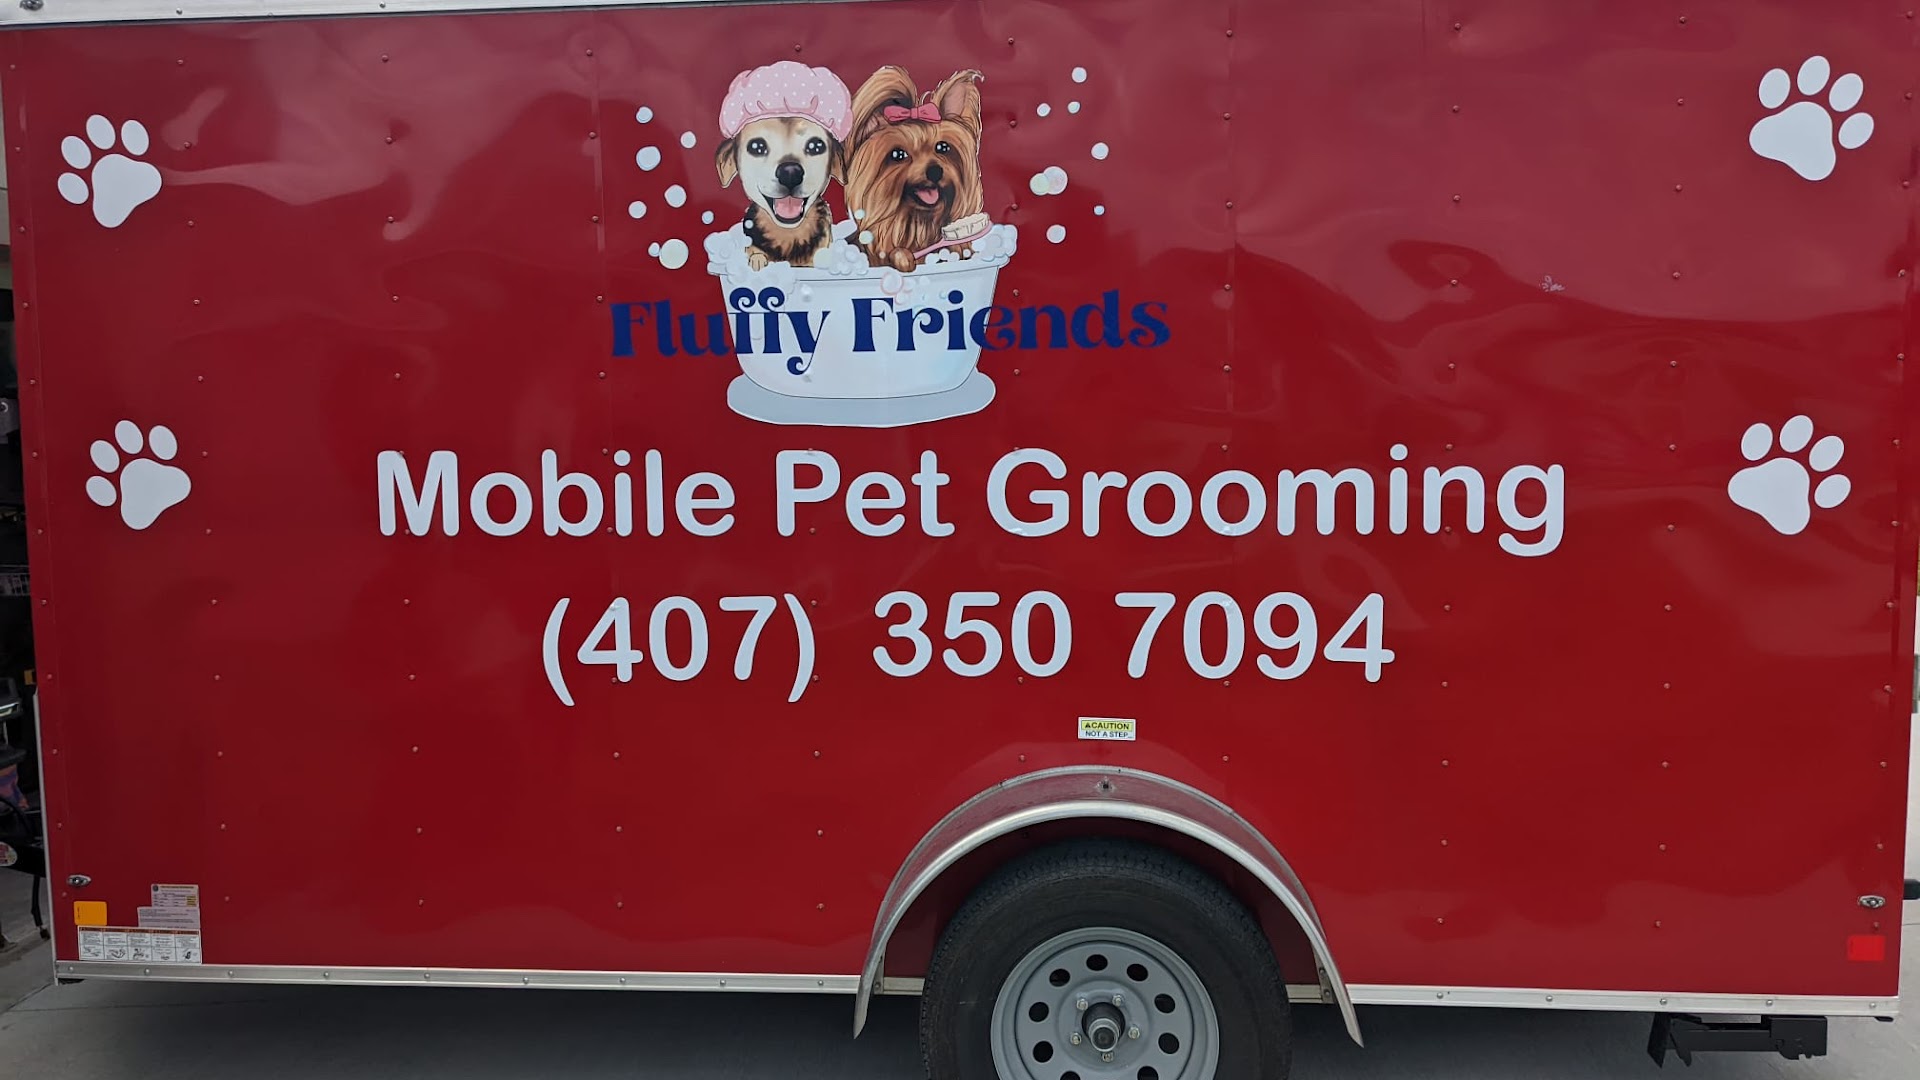 Fluffy Friends Mobile Grooming